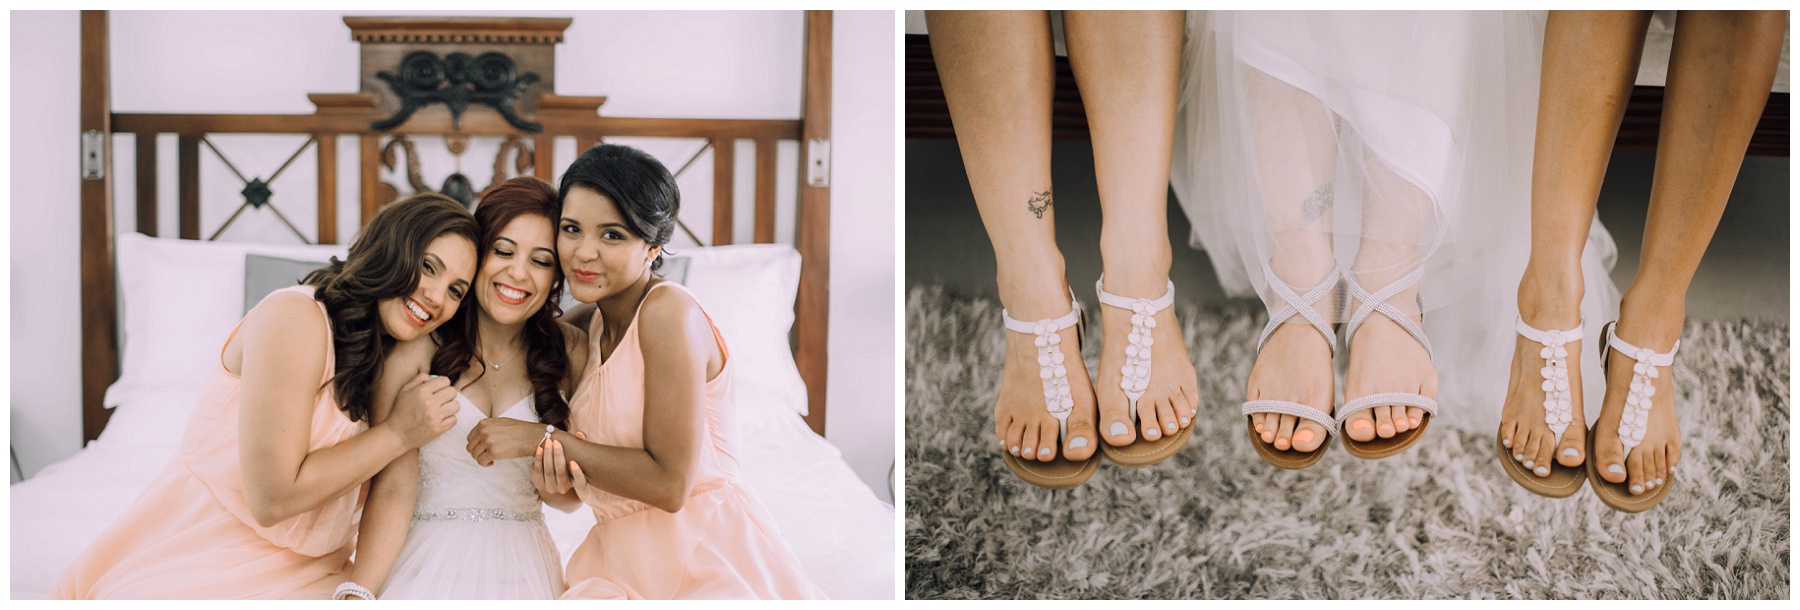 Ronel Kruger Cape Town Wedding and Lifestyle Photographer_1283.jpg